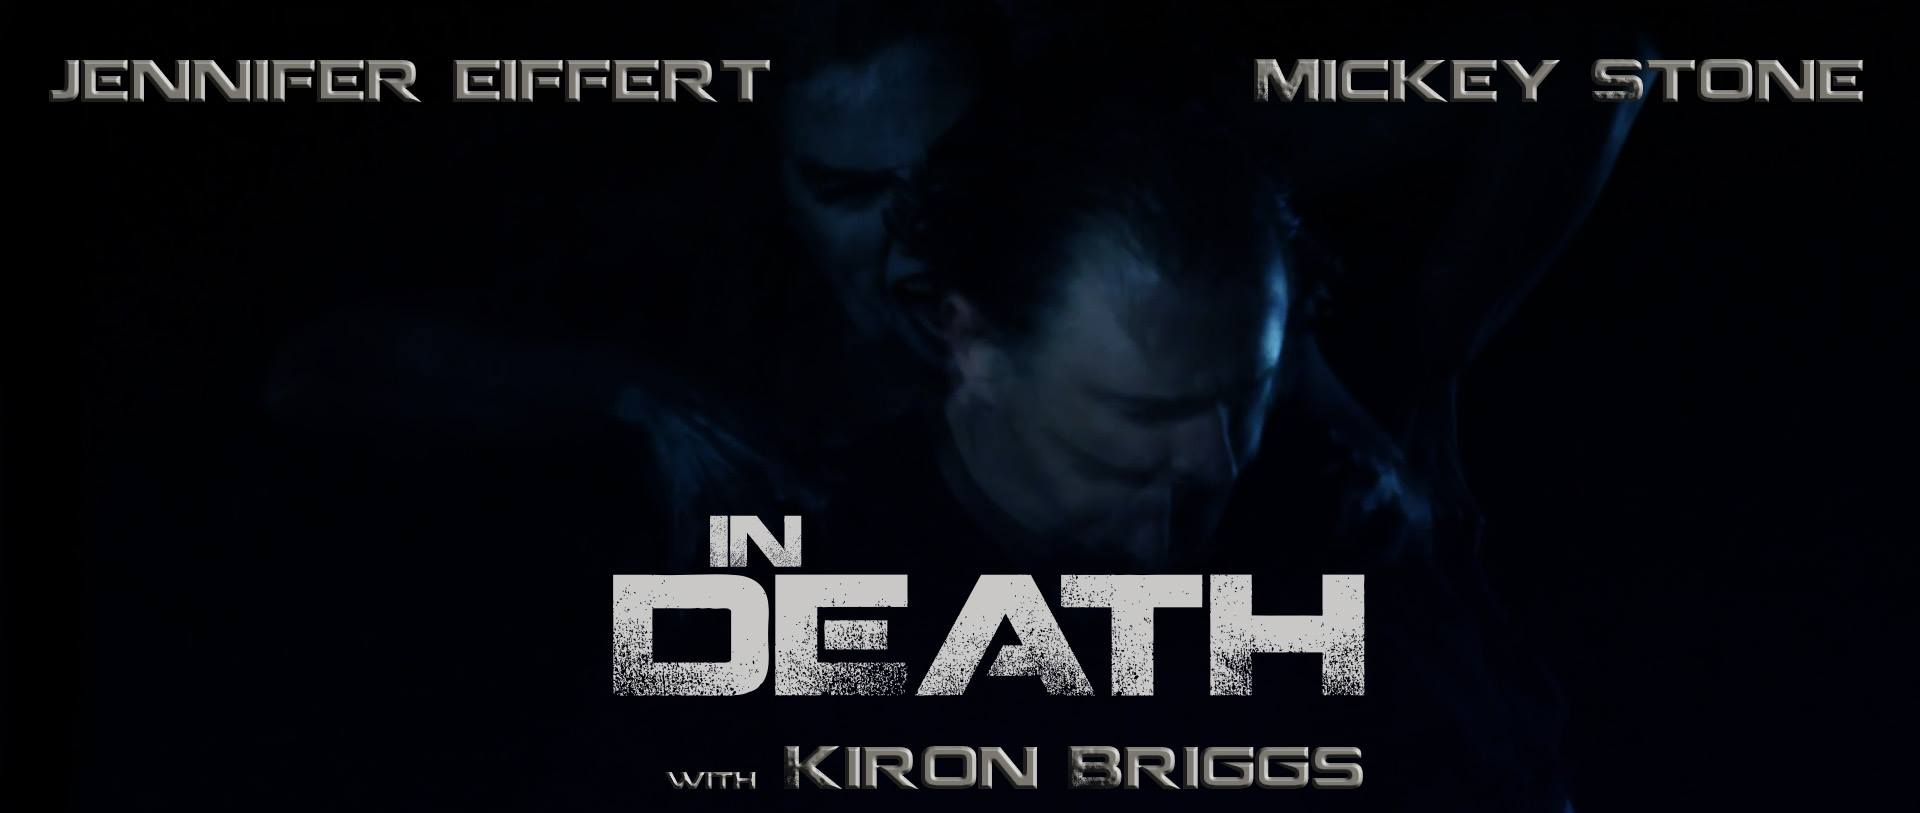 Movie poster for the short film 